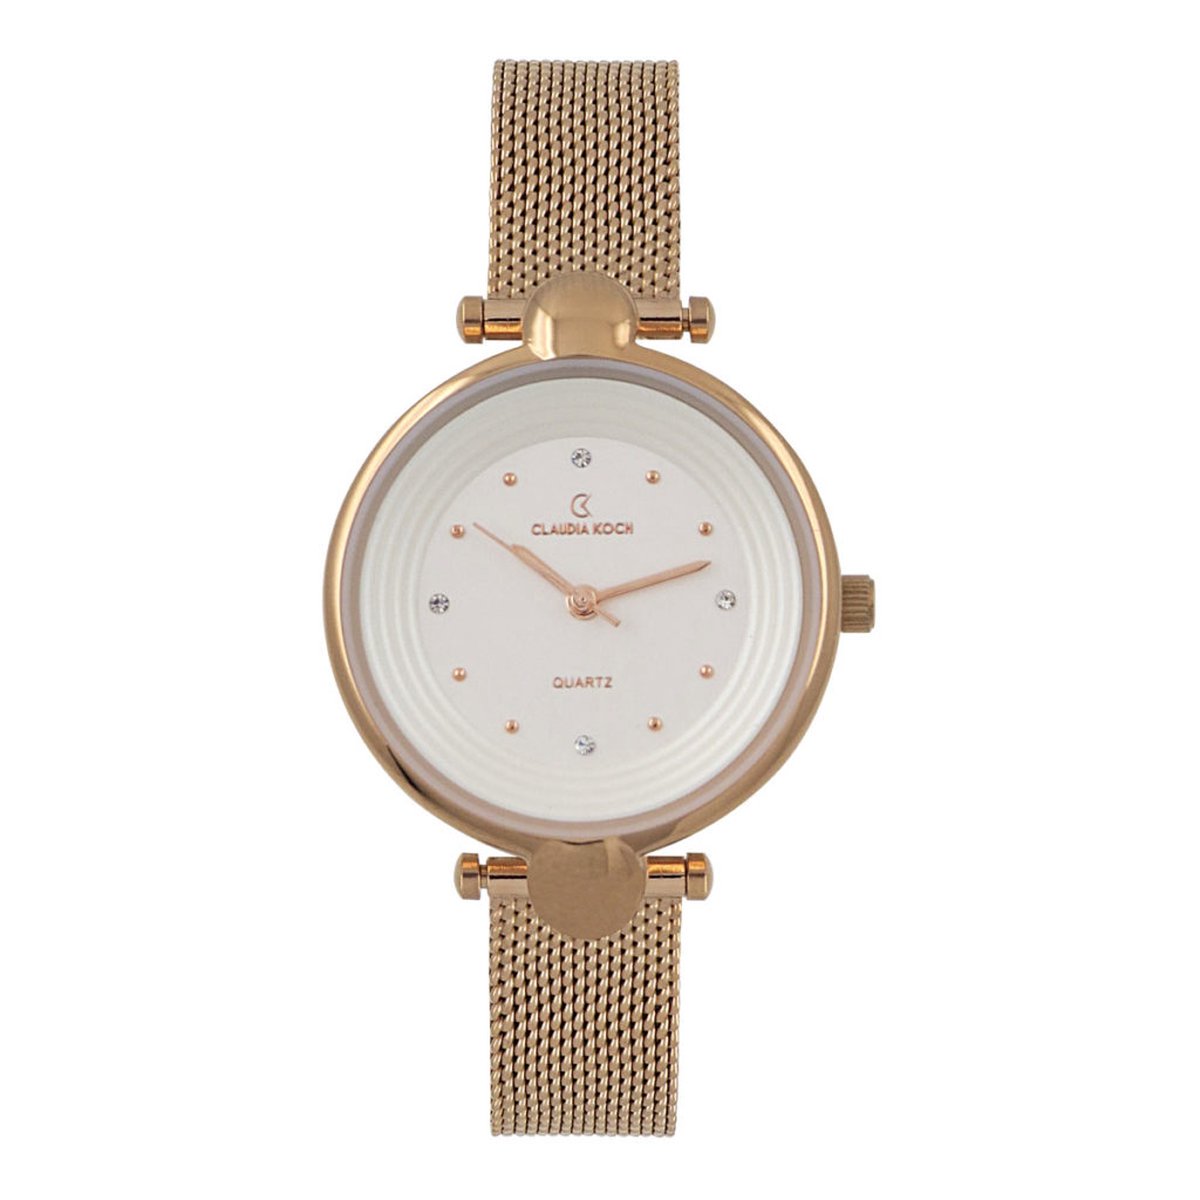 Claudia Koch CK 2955 Women Rosegold with White